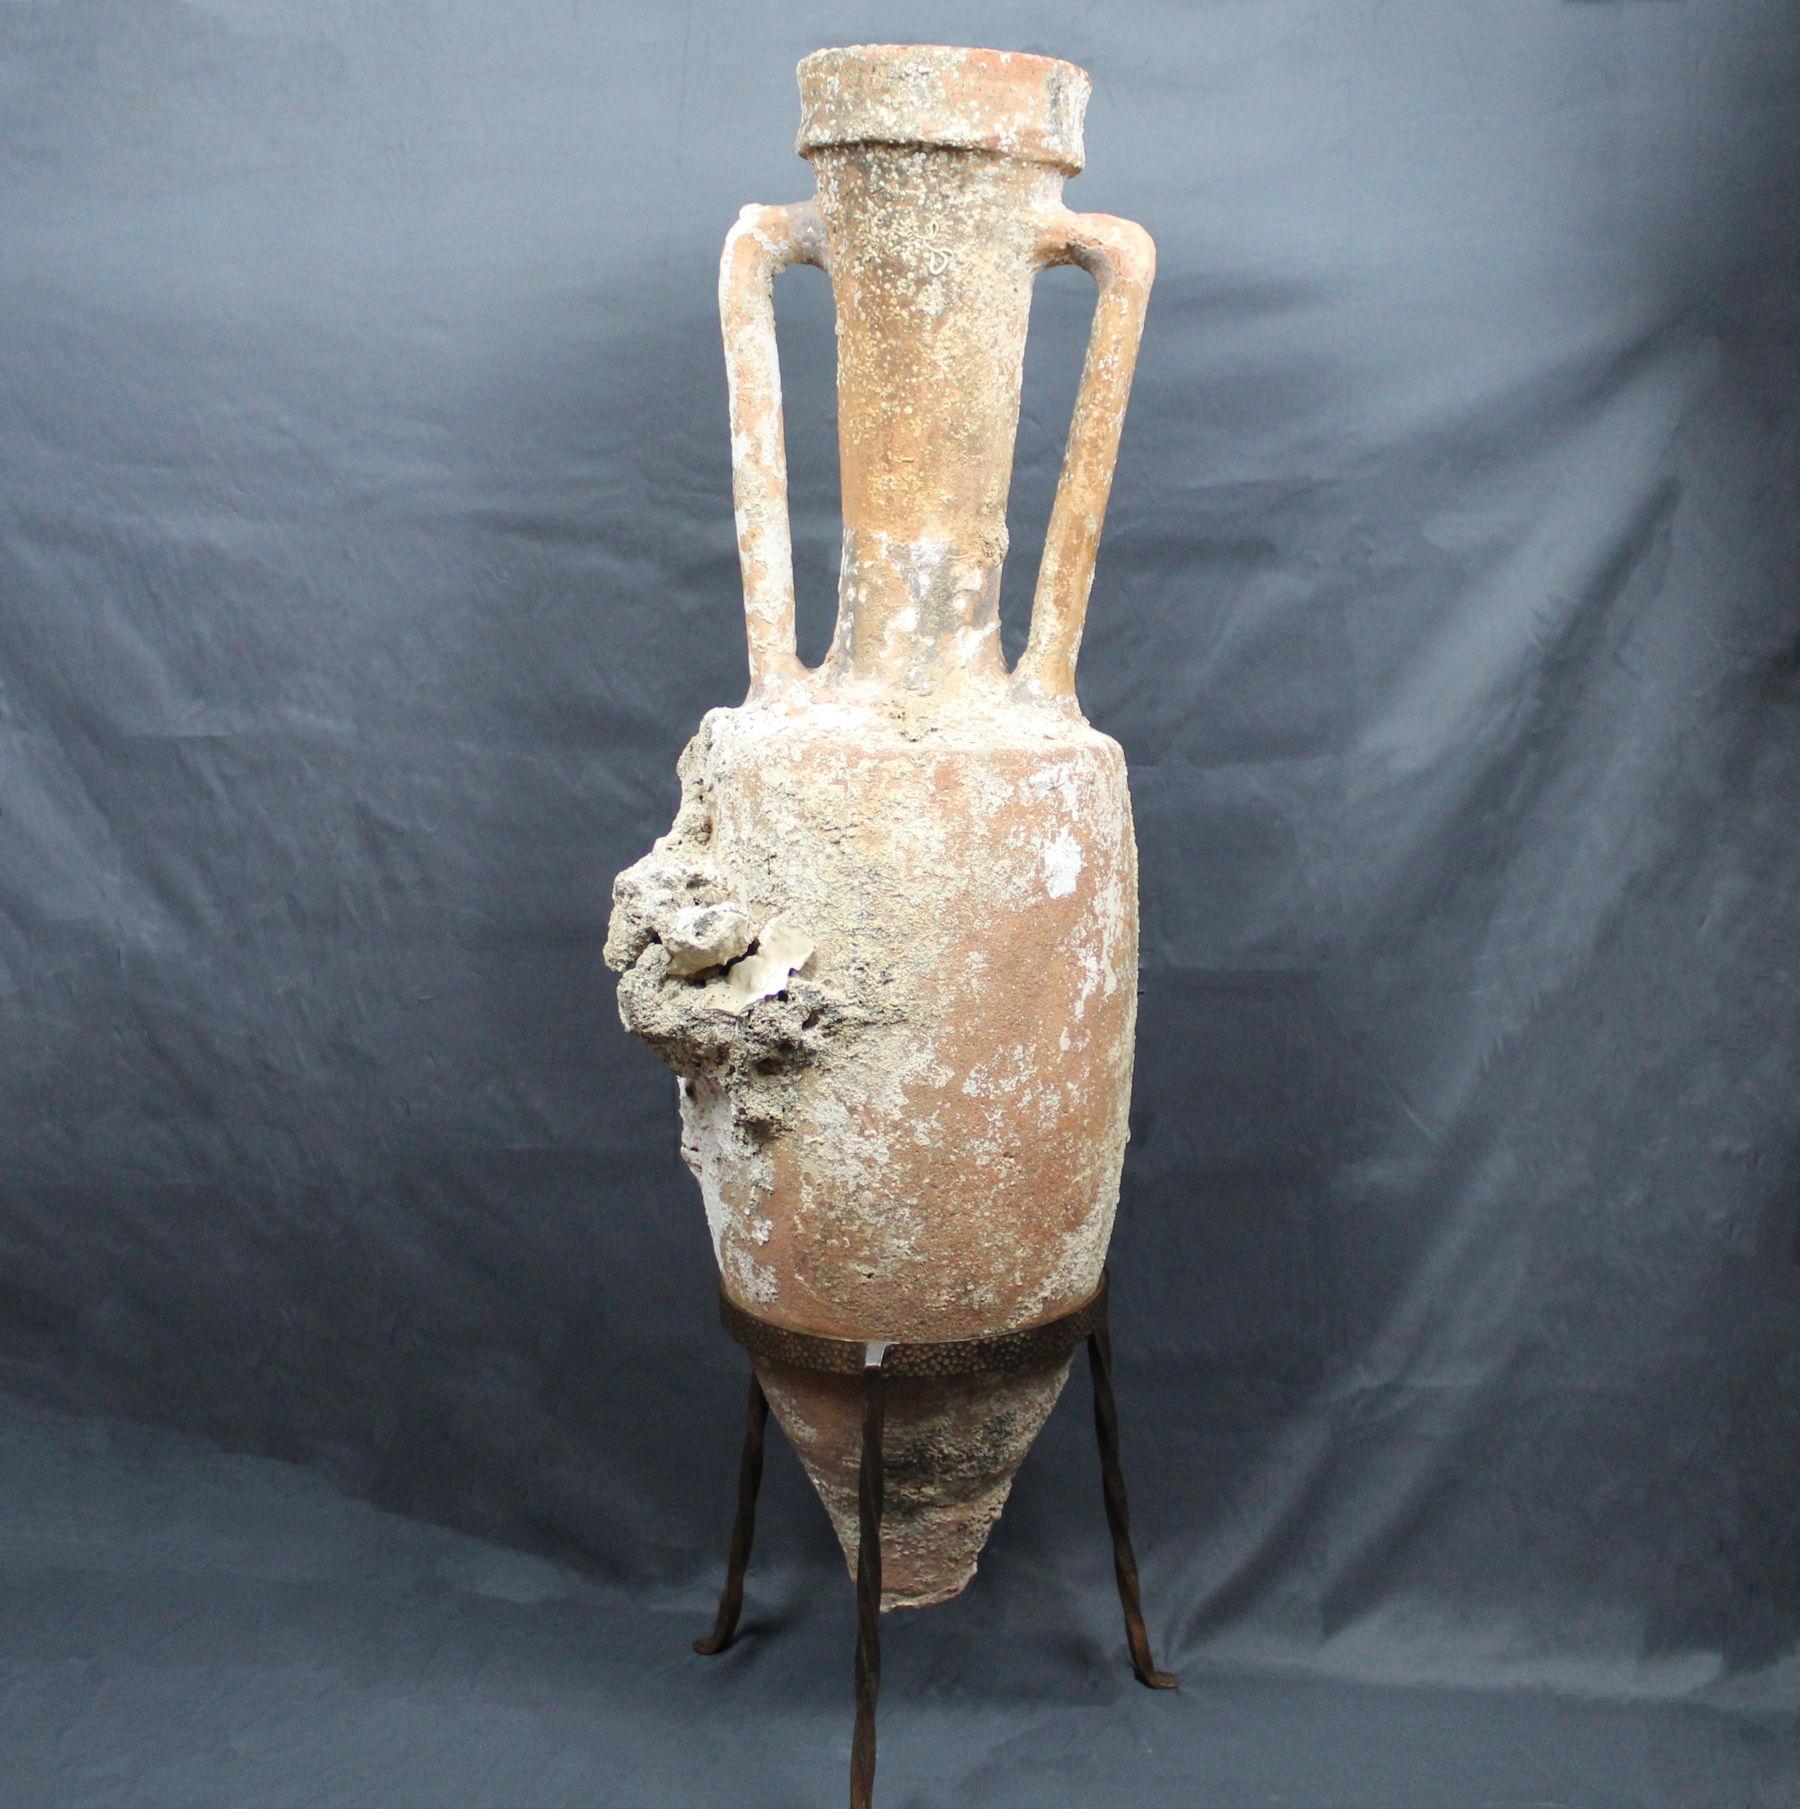 ITEM: Shipwreck amphora, Type Dressel 1B
MATERIAL: Pottery
CULTURE: Roman, Republican period
PERIOD: 2nd – 1st Century B.C
DIMENSIONS: 110 cm x 29 cm (without stand), 117 cm x 29 cm (with stand)
CONDITION: Good condition. Small restorations in the